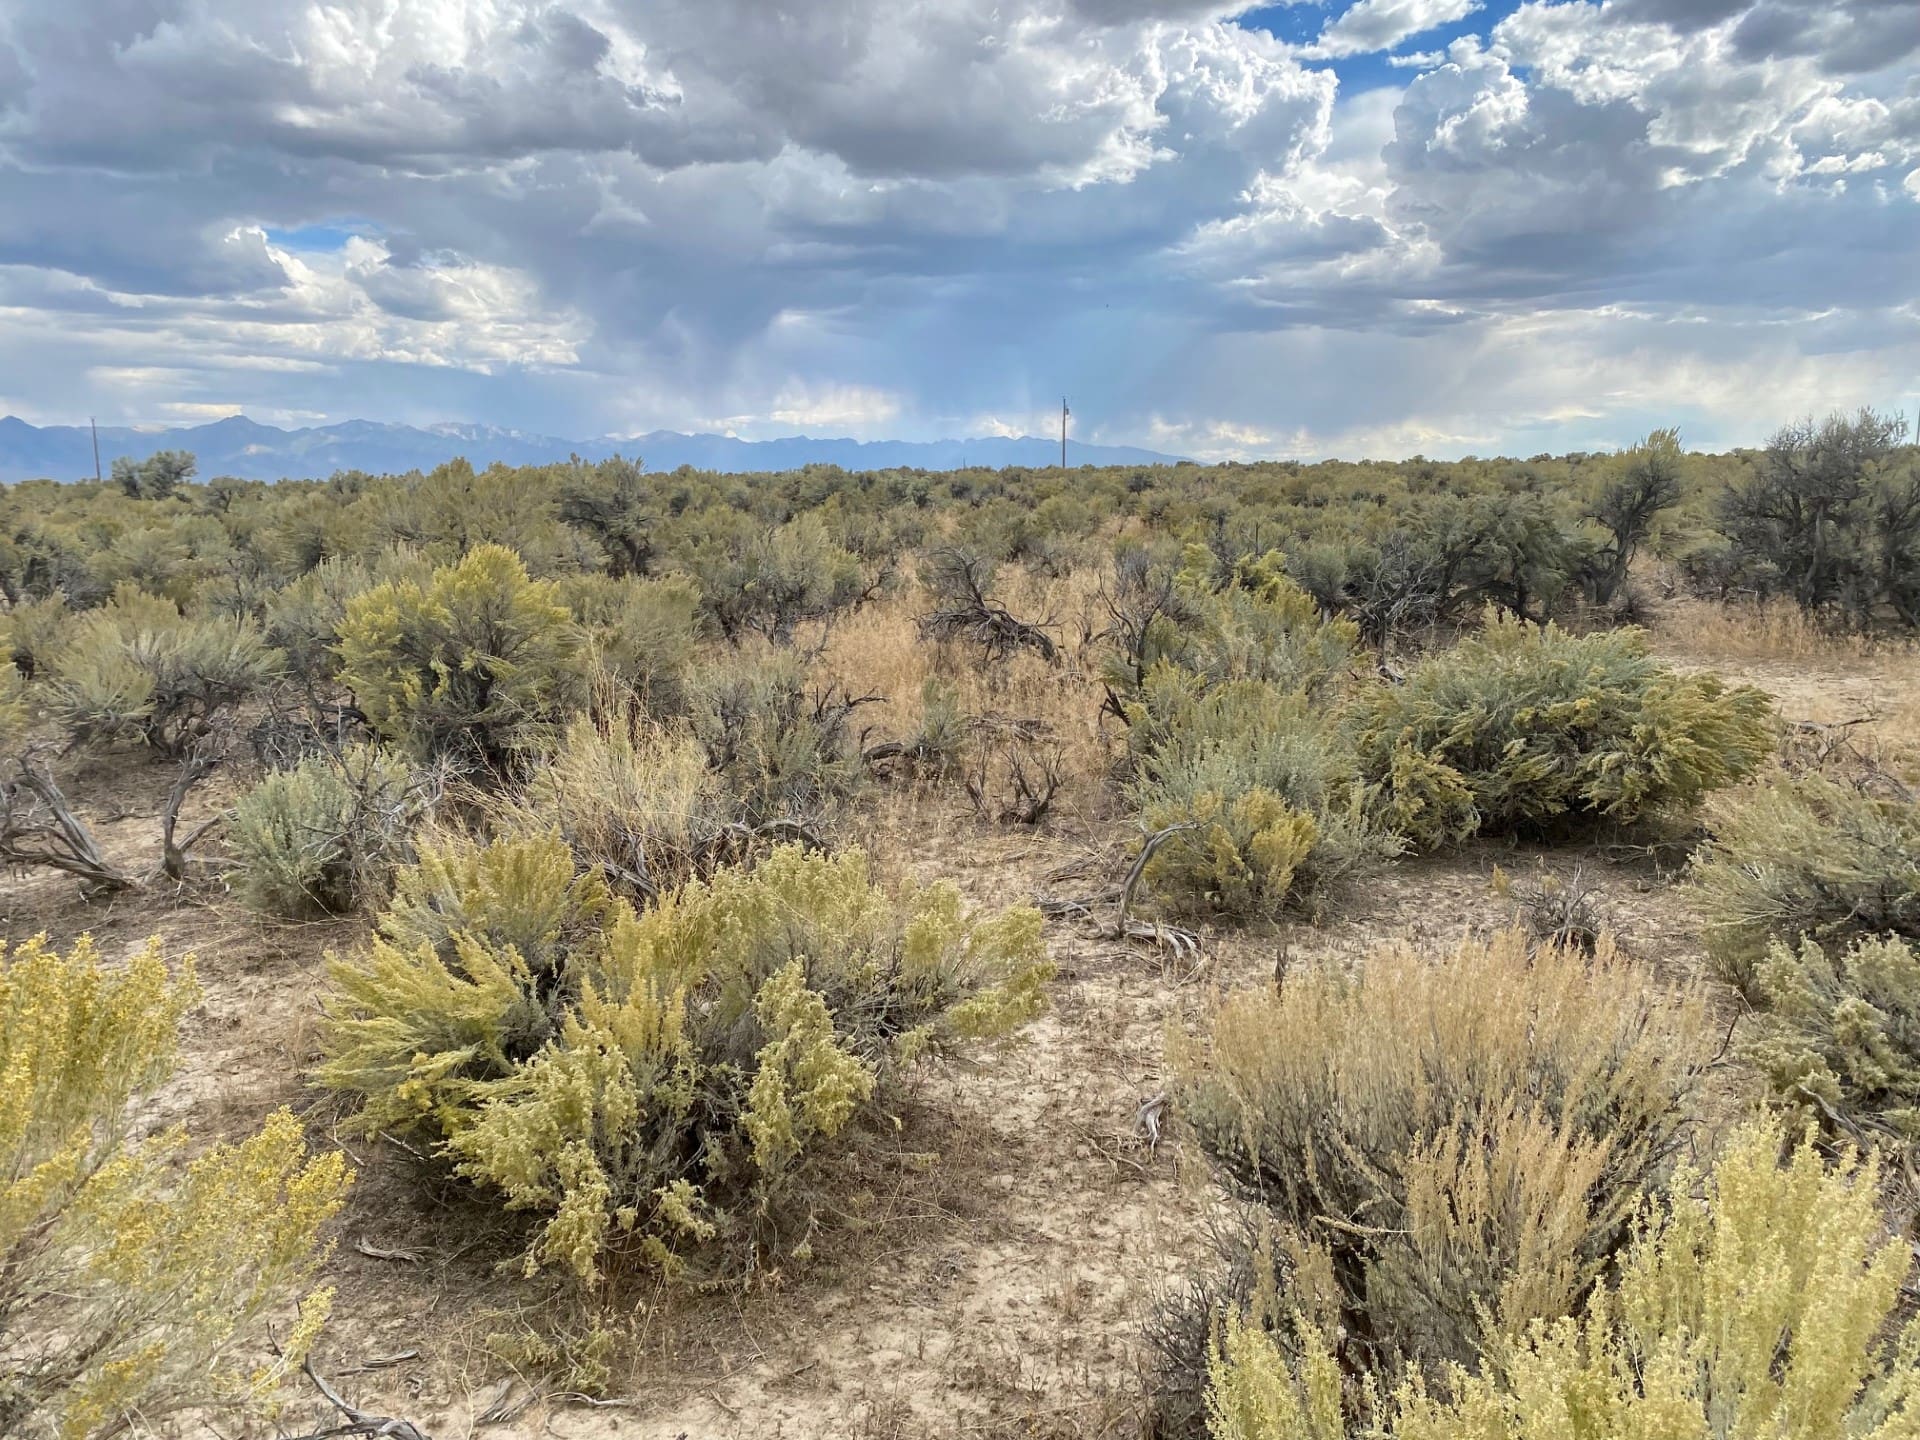 1.26 Acre Ranchette Elko Nevada With Fabulous Views Of The Ruby Mountains & Humboldt Peak 11,025 Ft photo 16